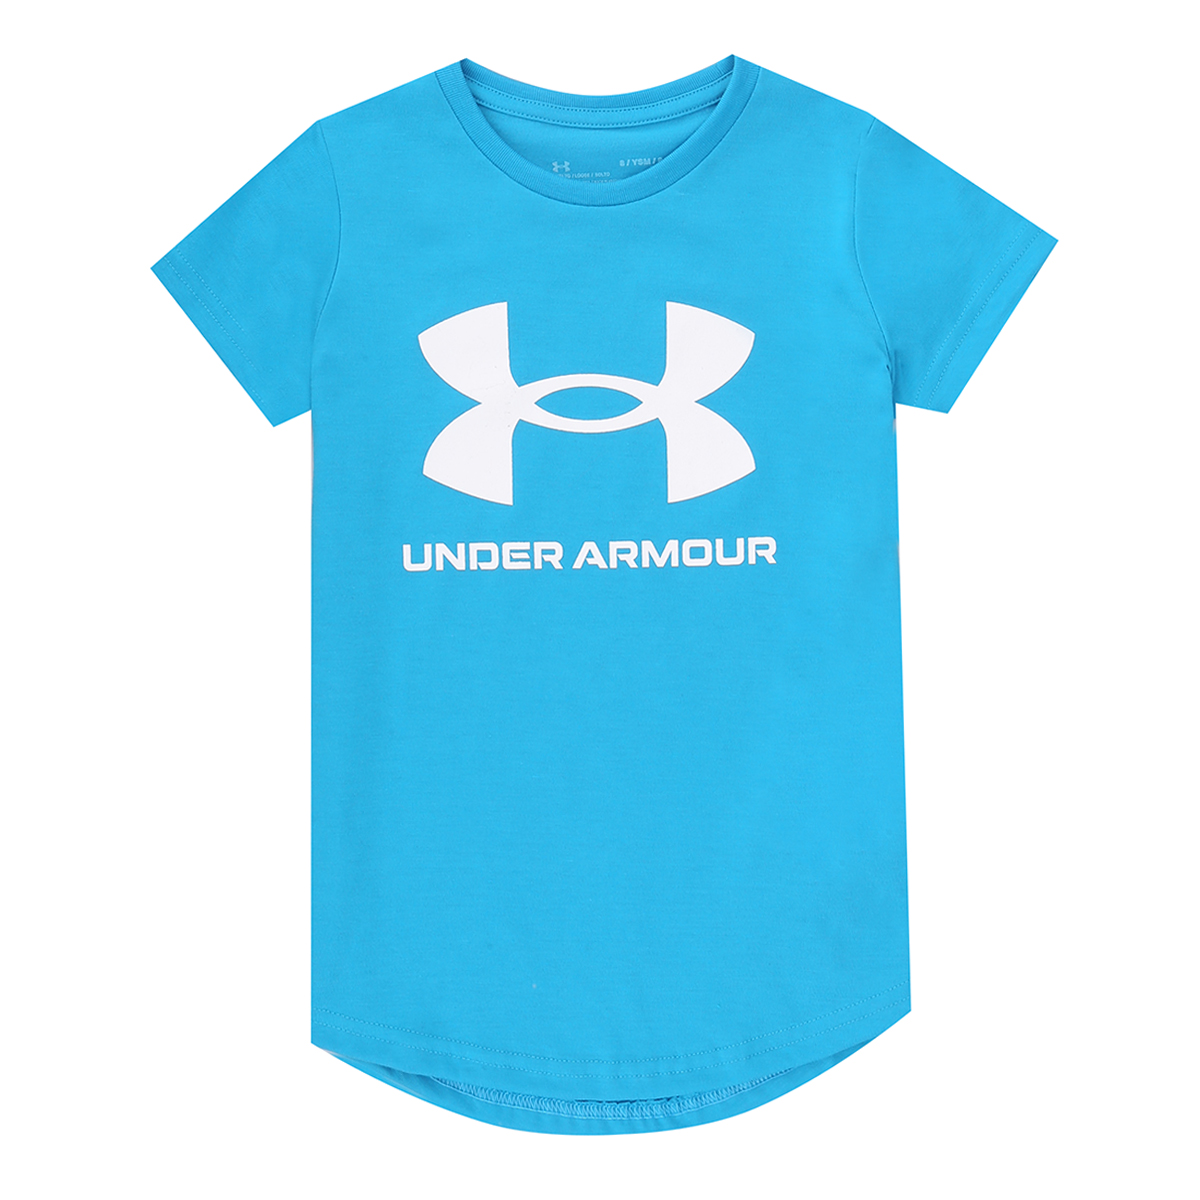 Remera Under Armour Live Gp,  image number null